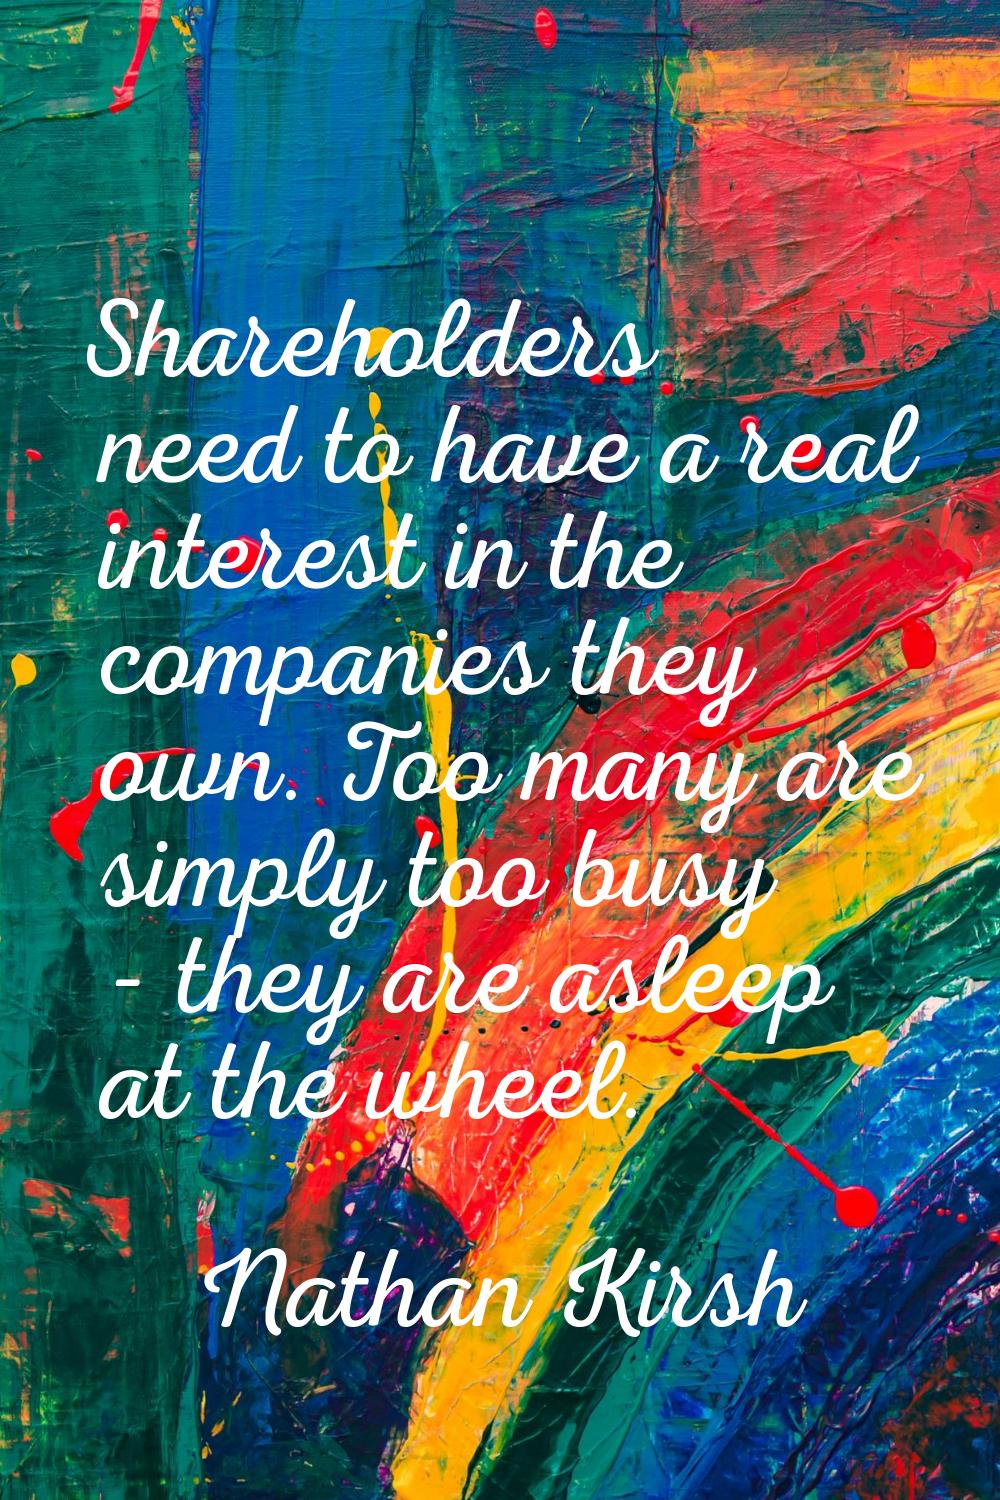 Shareholders need to have a real interest in the companies they own. Too many are simply too busy -